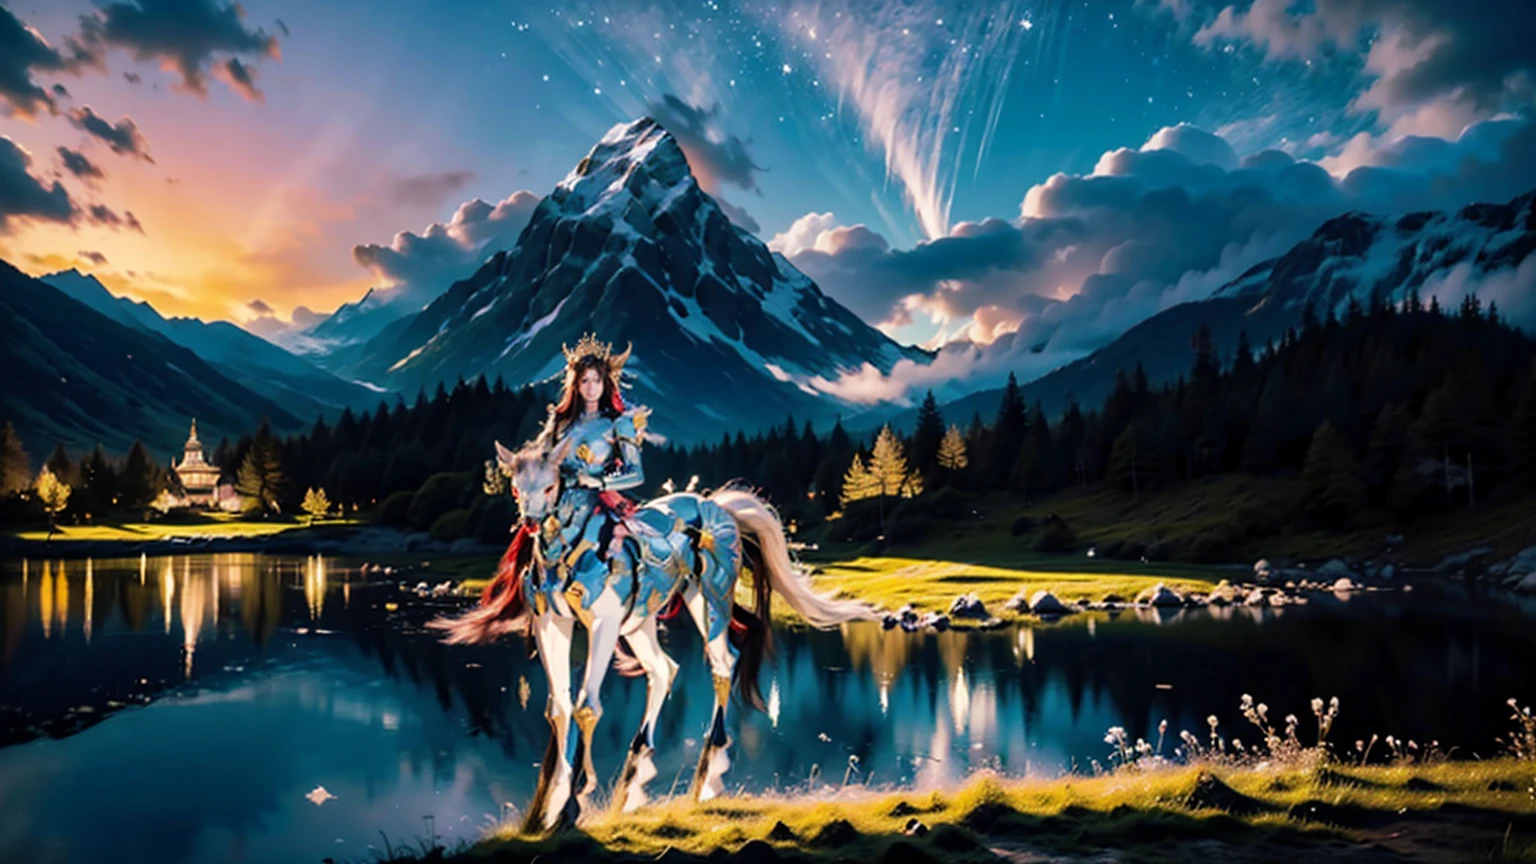 In the beautiful illustration of this super-grand scene，The ultra-distant lens shows us（More than eight distinctive and beautiful female centaurs，Half man, half horse，Half man, half horse character：9.9），Their personality、Distinctive and vivid features。from（A radiant, angelic, snow-white centaur from heaven：1.1），arrive（Nightmare-like fiery red centaur surrounded by flames：1.1）、Arrive again（Green Centaur, the wind fairy dancing in the air：1.1）、Arrive again有（One-horned blue centaur surrounded by lightning：1.1），arrive（A mechanical-style mecha Centaur shining with metallic light：1.1）、Arrive again（A powerful dragon-shaped centaur wearing colorful dragon scale leather：1.1）、Arrive again（A slender elven centaur that is graceful and agile：1.1）Gracefully wears a flower crown、arrive（Enchanting and charming Tiflin centaurs：1.1）、Arrive again（A succubus centaur with an indescribably sexy feeling：1.1）。Each Centaur character fully demonstrates his unique style。The illustration uses advanced artistic techniques and tools，Use nesting、Weaving、Splicing、perspective、interlude、Montage and other artistic techniques，Divide the scene into sections by geometric arrangement，Each part corresponds to a role，from and more efficiently utilize space，Make eight centaurs exist in one picture at the same time，（The style tends to be grotesque、Hayao Miyazaki、Aesthetic、Unavailable：3.3）。Through Midjourney's advanced brush tools、Color palette、Material packs and model packs、Texture tools，For each centaur, beautiful props are designed to increase racial characteristics、Clothing and physical features，Enhances the character's personality and visual appeal，（Stunning landscapes in illustrations，There are changing skies、rainbow、Aurora、Stars and Moon，Incorporating iconic landmarks such as Mount Everest，and fireworks、Tranquil Lake、Natural and urban elements of waves and neon lights，Creates a magical atmosphere：1.5），Centaurs demonstrate their unique abilities and equipment in a variety of environments，This is true even in extreme alien landscapes。Use Midjourney's toolaterial packs、Texture tools、The color palette makes depicting details vivid and realistic，from complex hairstyles and different ethnic characteristics、Body、Appearance features、Clothing arrives with realistic textures，Greatly improved the realism of the Centaurs and their surroundings，The fusion of multiple art styles adds dynamism to the character&#39;s movement at all angles，The overall visual experience is further enriched。The final illustration was described as a "masterpiece"，It has the characteristics of "best quality" and "realistic"，The details put into the creative process are shown、Level of creativity and craftsmanship。 hdr，（Reality，Masterpiece quality，Best quality）